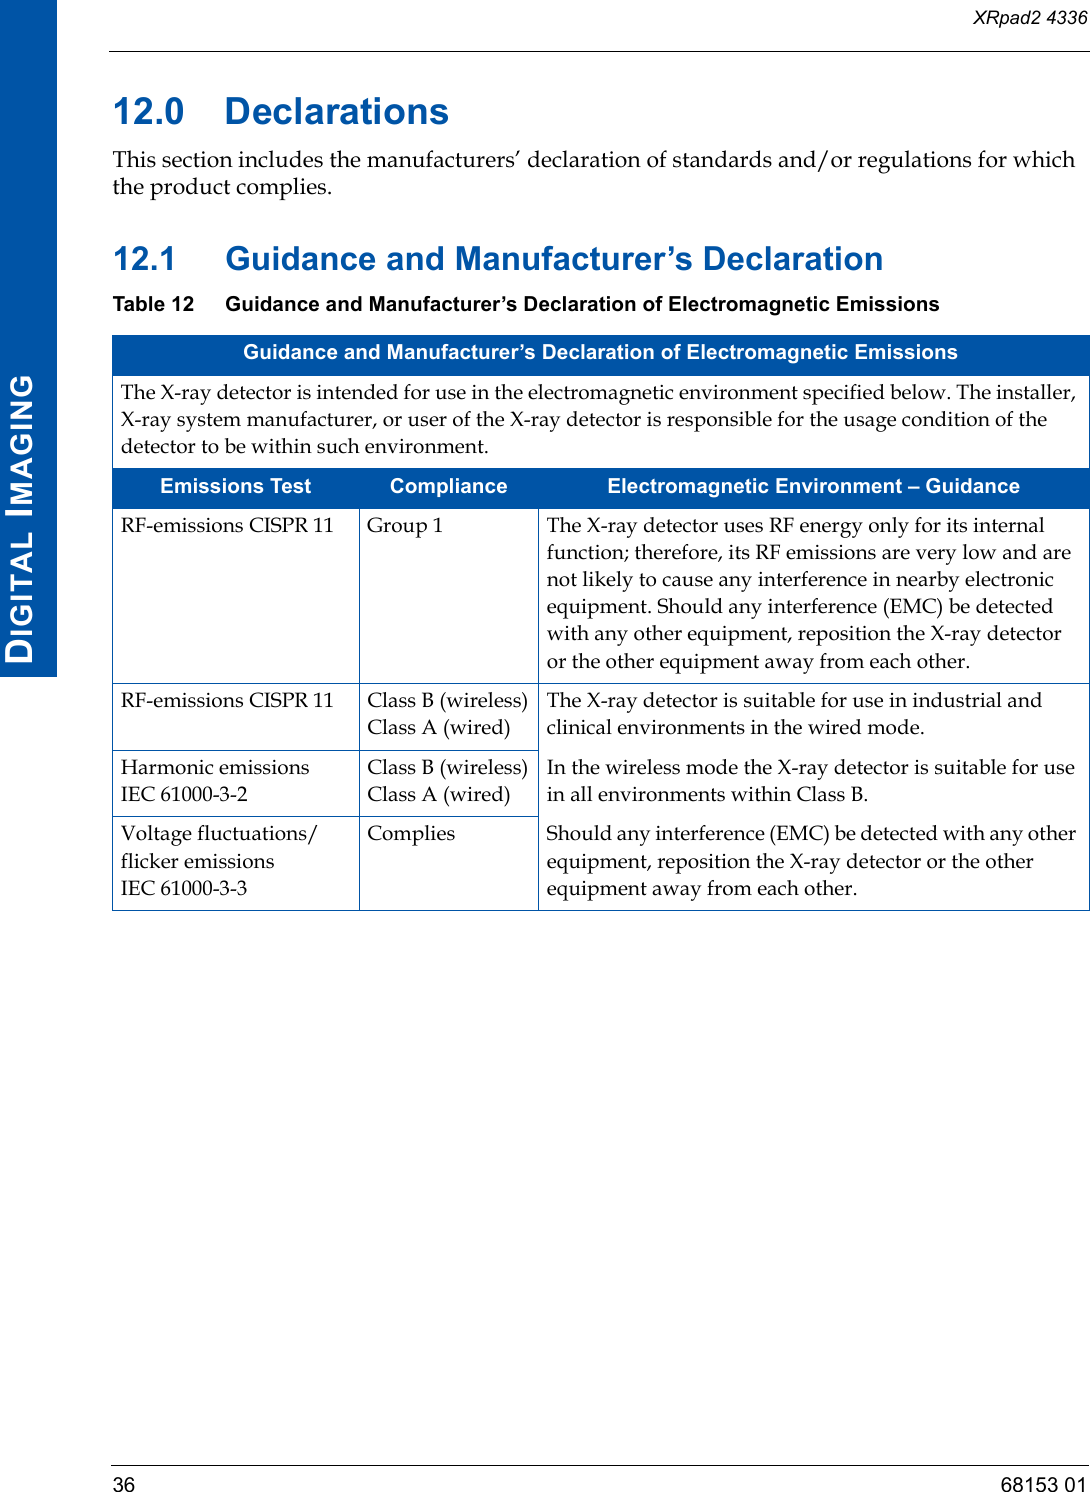 XRpad2 433636 68153 01DIGITAL IMAGING12.0 DeclarationsThis section includes the manufacturers’ declaration of standards and/or regulations for which the product complies.12.1 Guidance and Manufacturer’s DeclarationTable 12 Guidance and Manufacturer’s Declaration of Electromagnetic EmissionsGuidance and Manufacturer’s Declaration of Electromagnetic EmissionsThe X-ray detector is intended for use in the electromagnetic environment specified below. The installer, X-ray system manufacturer, or user of the X-ray detector is responsible for the usage condition of the detector to be within such environment.Emissions Test Compliance Electromagnetic Environment – GuidanceRF-emissions CISPR 11 Group 1 The X-ray detector uses RF energy only for its internal function; therefore, its RF emissions are very low and are not likely to cause any interference in nearby electronic equipment. Should any interference (EMC) be detected with any other equipment, reposition the X-ray detector or the other equipment away from each other.RF-emissions CISPR 11 Class B (wireless)Class A (wired)The X-ray detector is suitable for use in industrial and clinical environments in the wired mode.In the wireless mode the X-ray detector is suitable for use in all environments within Class B.Should any interference (EMC) be detected with any other equipment, reposition the X-ray detector or the other equipment away from each other.Harmonic emissions IEC 61000-3-2Class B (wireless)Class A (wired)Voltage fluctuations/ flicker emissions IEC 61000-3-3Complies